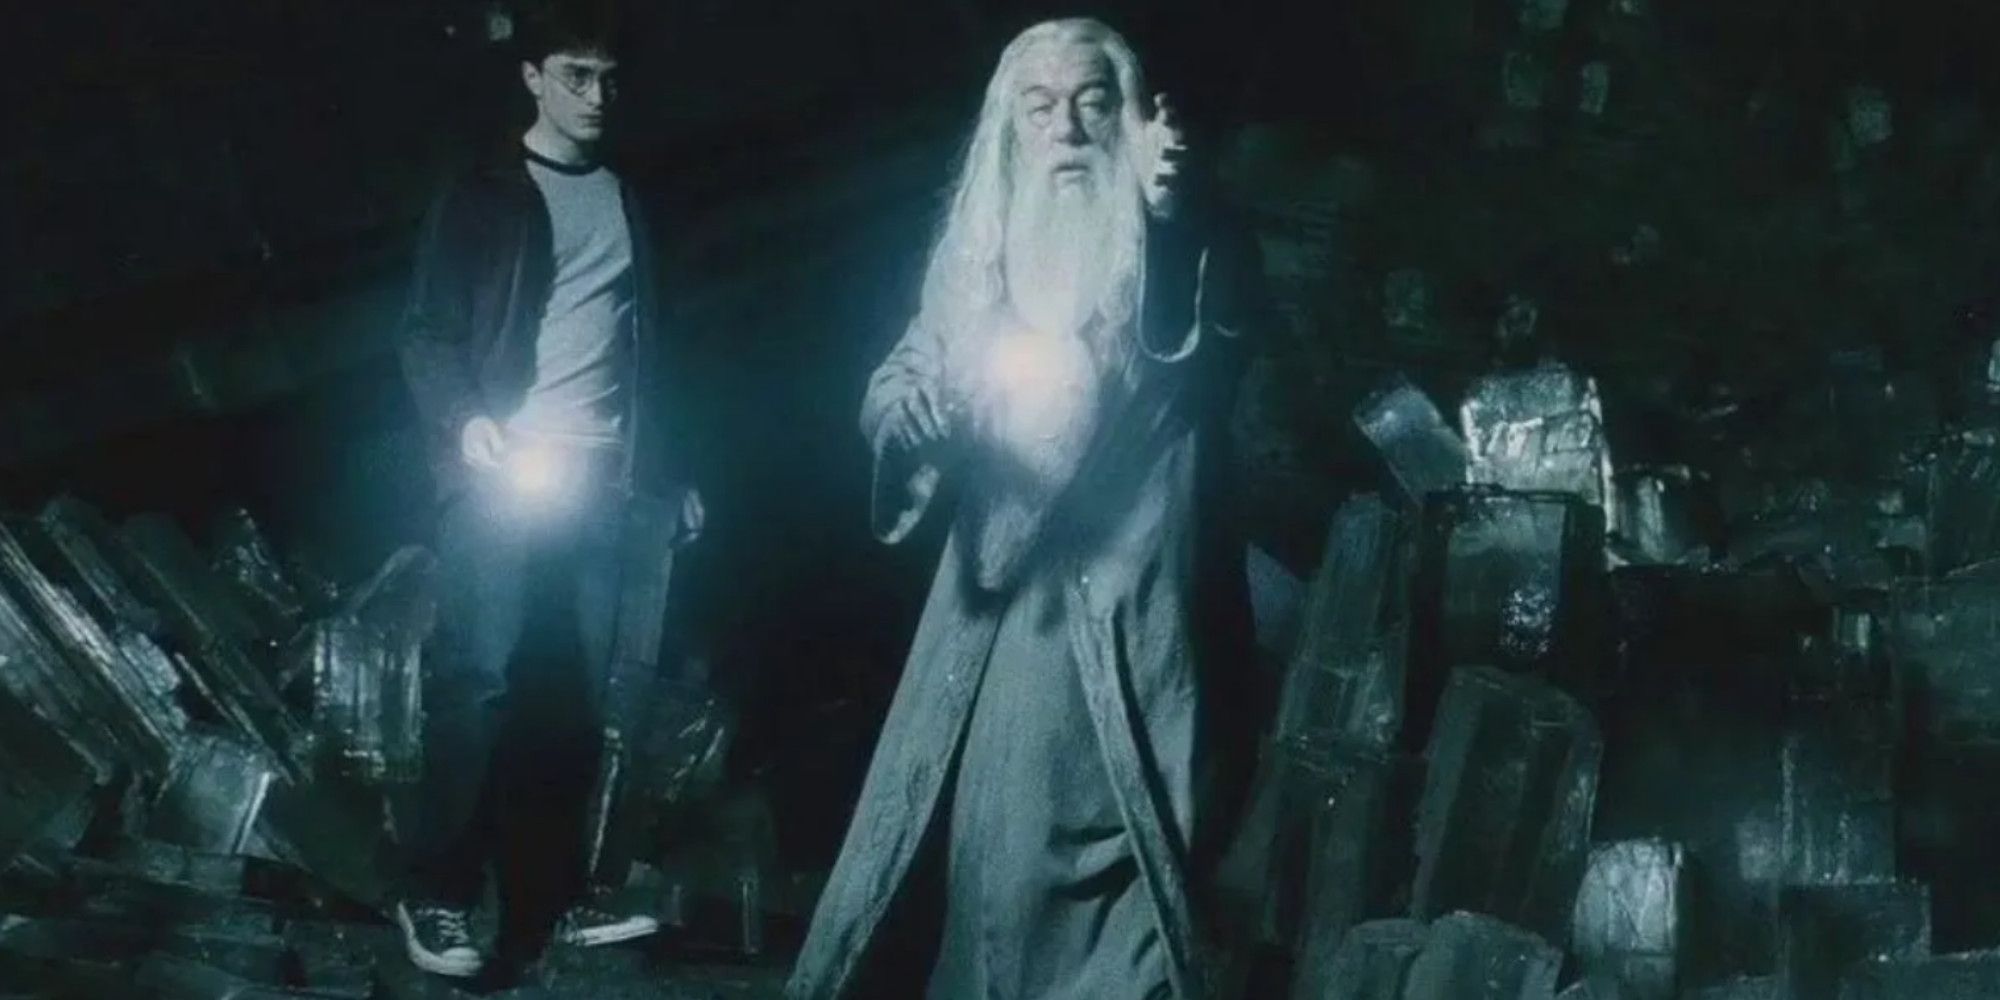 Harry Potter Scenes That Are Better In The Books Than The Movies Dumbledore and Harry agaisnt Voldermort's Inferni